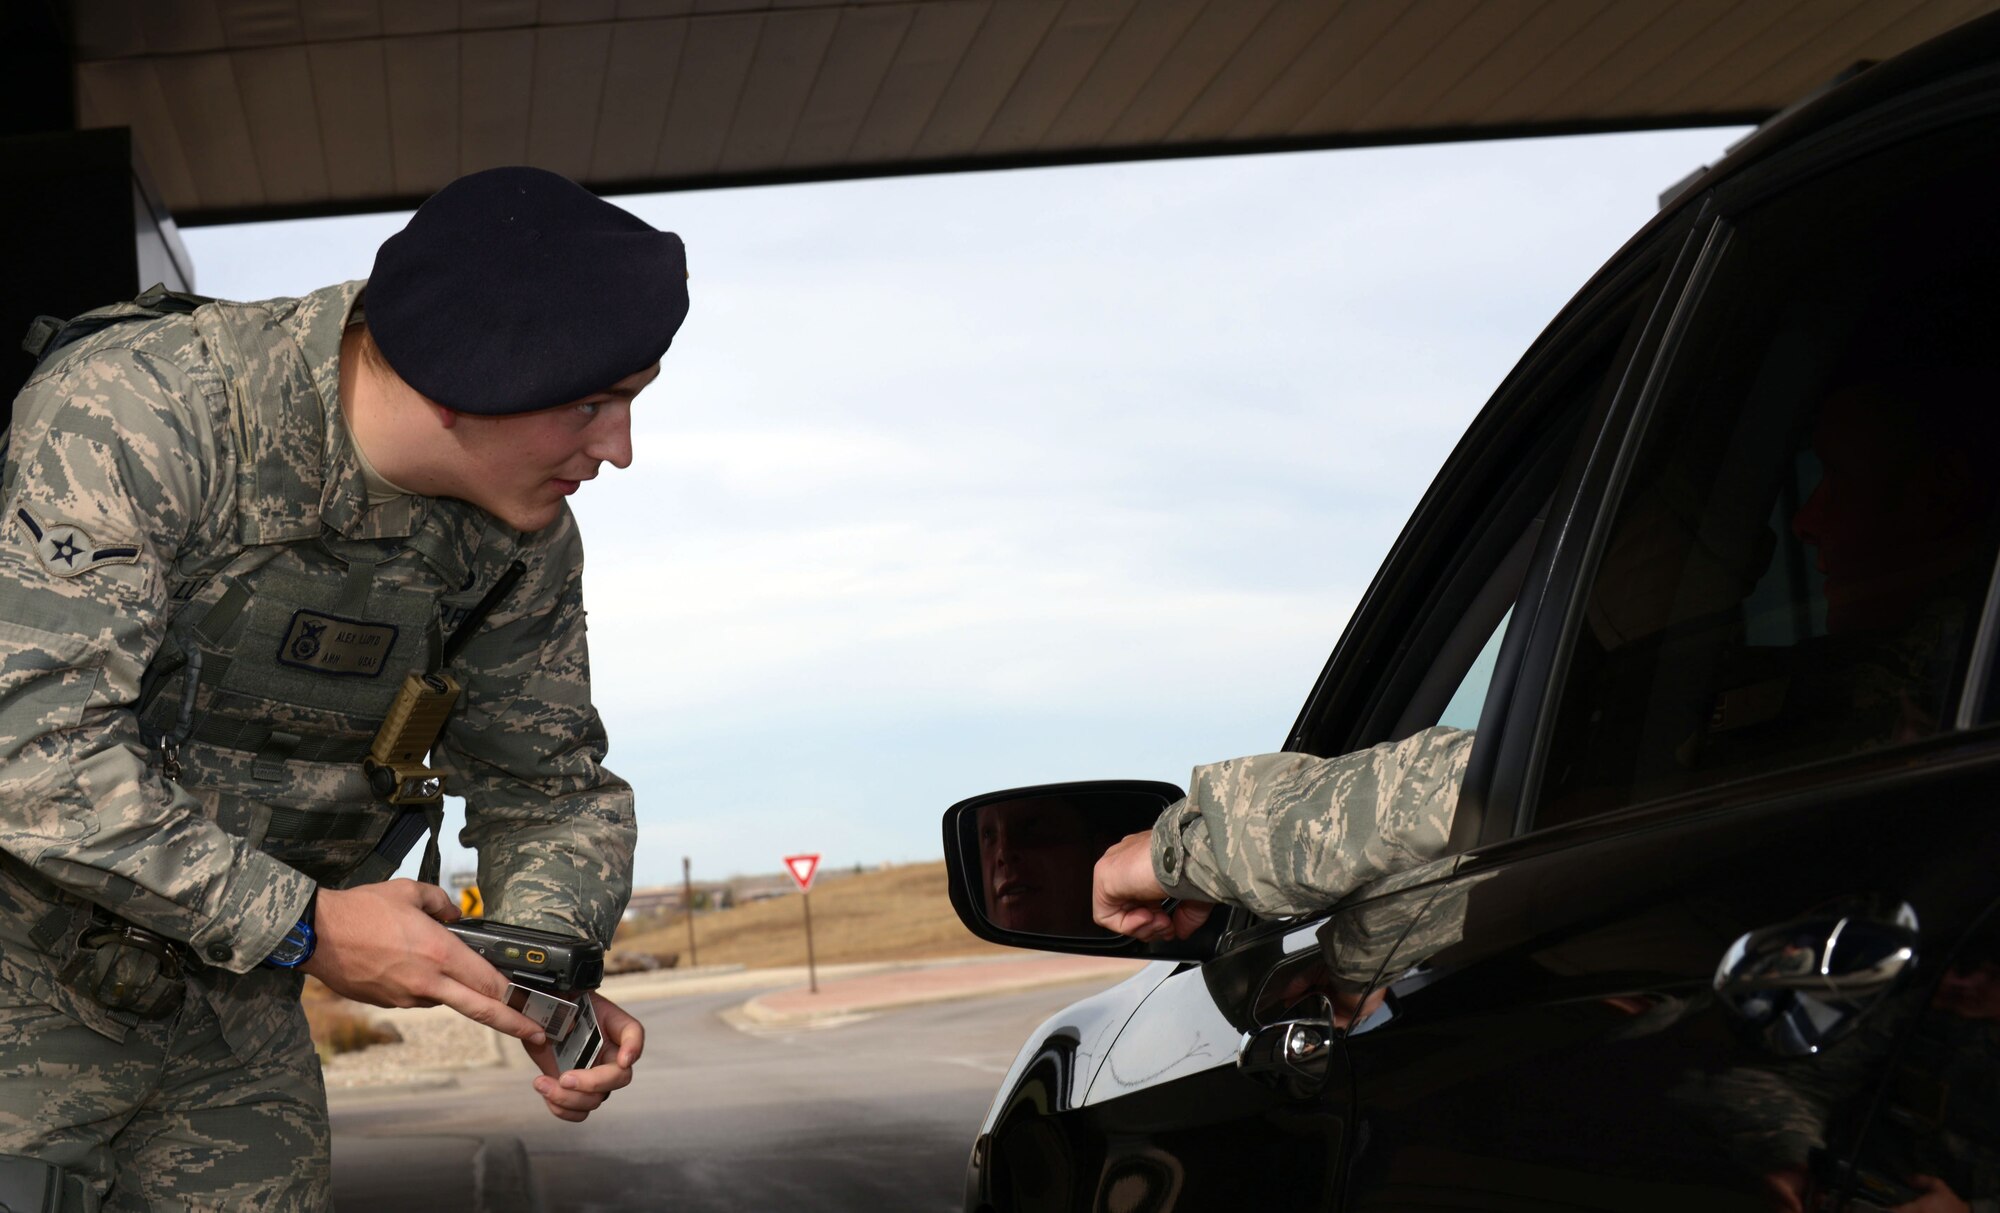 Airman Alex Lloyd, a response force member assigned to the 28th Security Forces Squadron, clears an Airman for entry at the Liberty Gate at Ellsworth AFB, S.D., Oct. 27, 2016. Defenders guard the gate 24 hours a day to ensure the base is secure. (U.S. Air Force photo by Airman 1st Class Donald Knechtel)